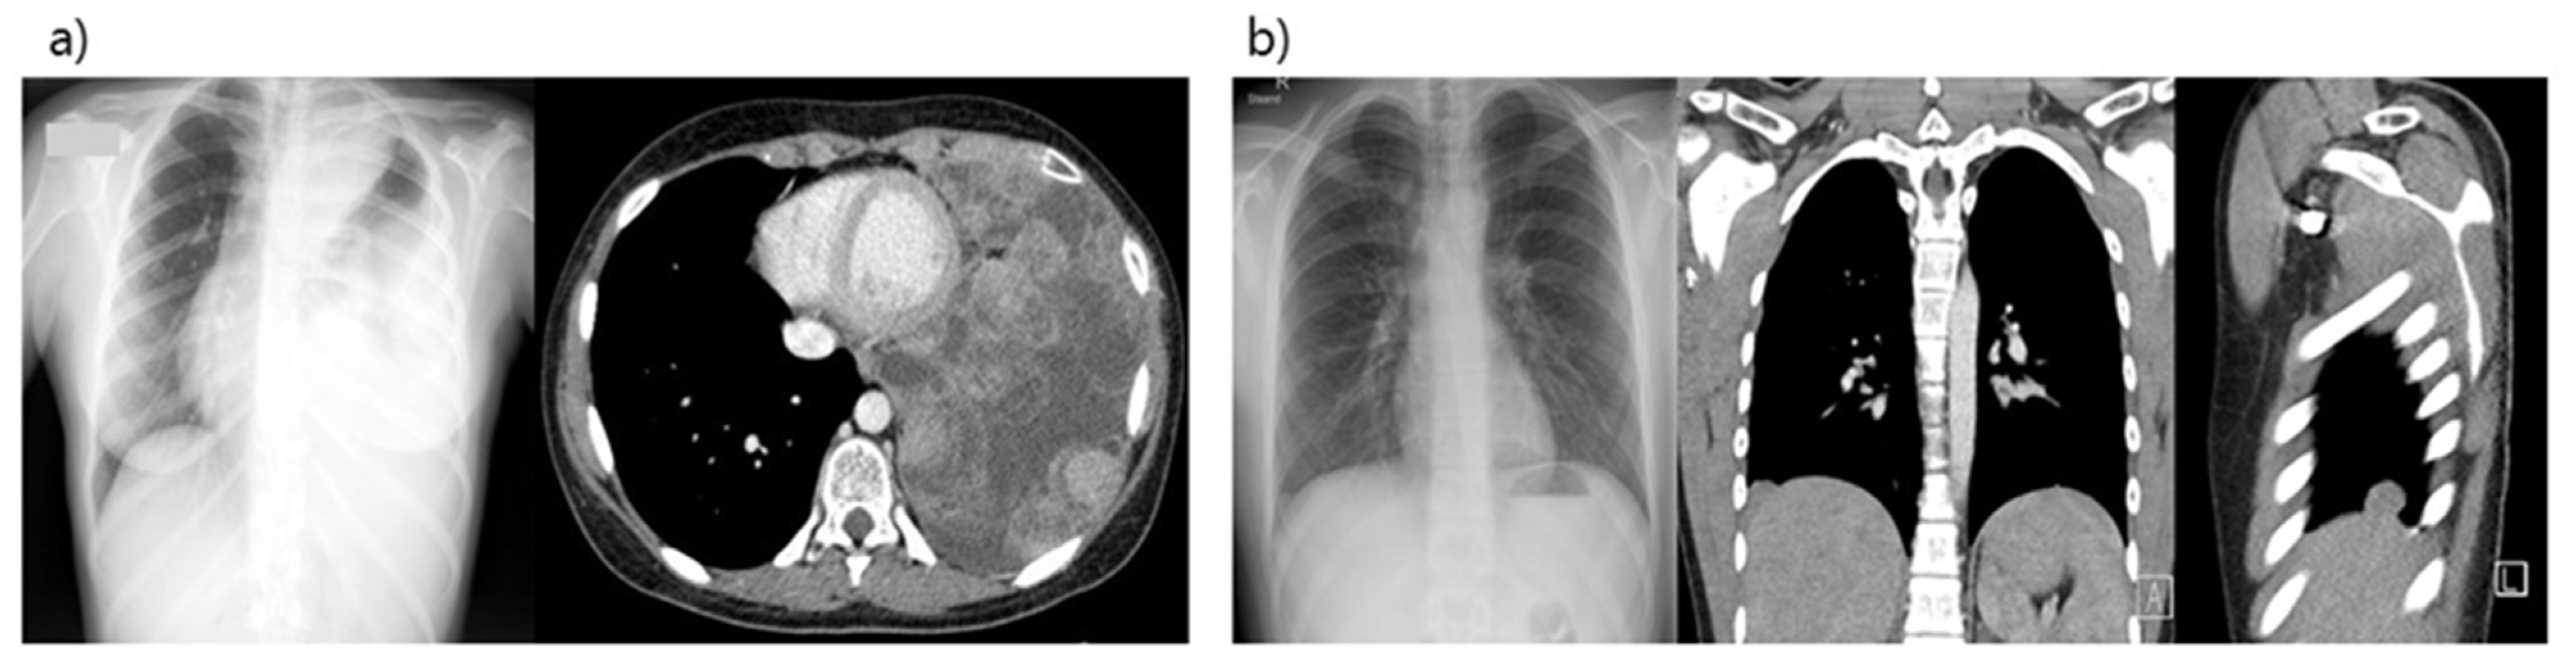 Cancers Free Full-Text Pleuropneumonectomy as Salvage Therapy in Children Suffering from Primary or Metastatic Sarcomas with Pleural Localizations